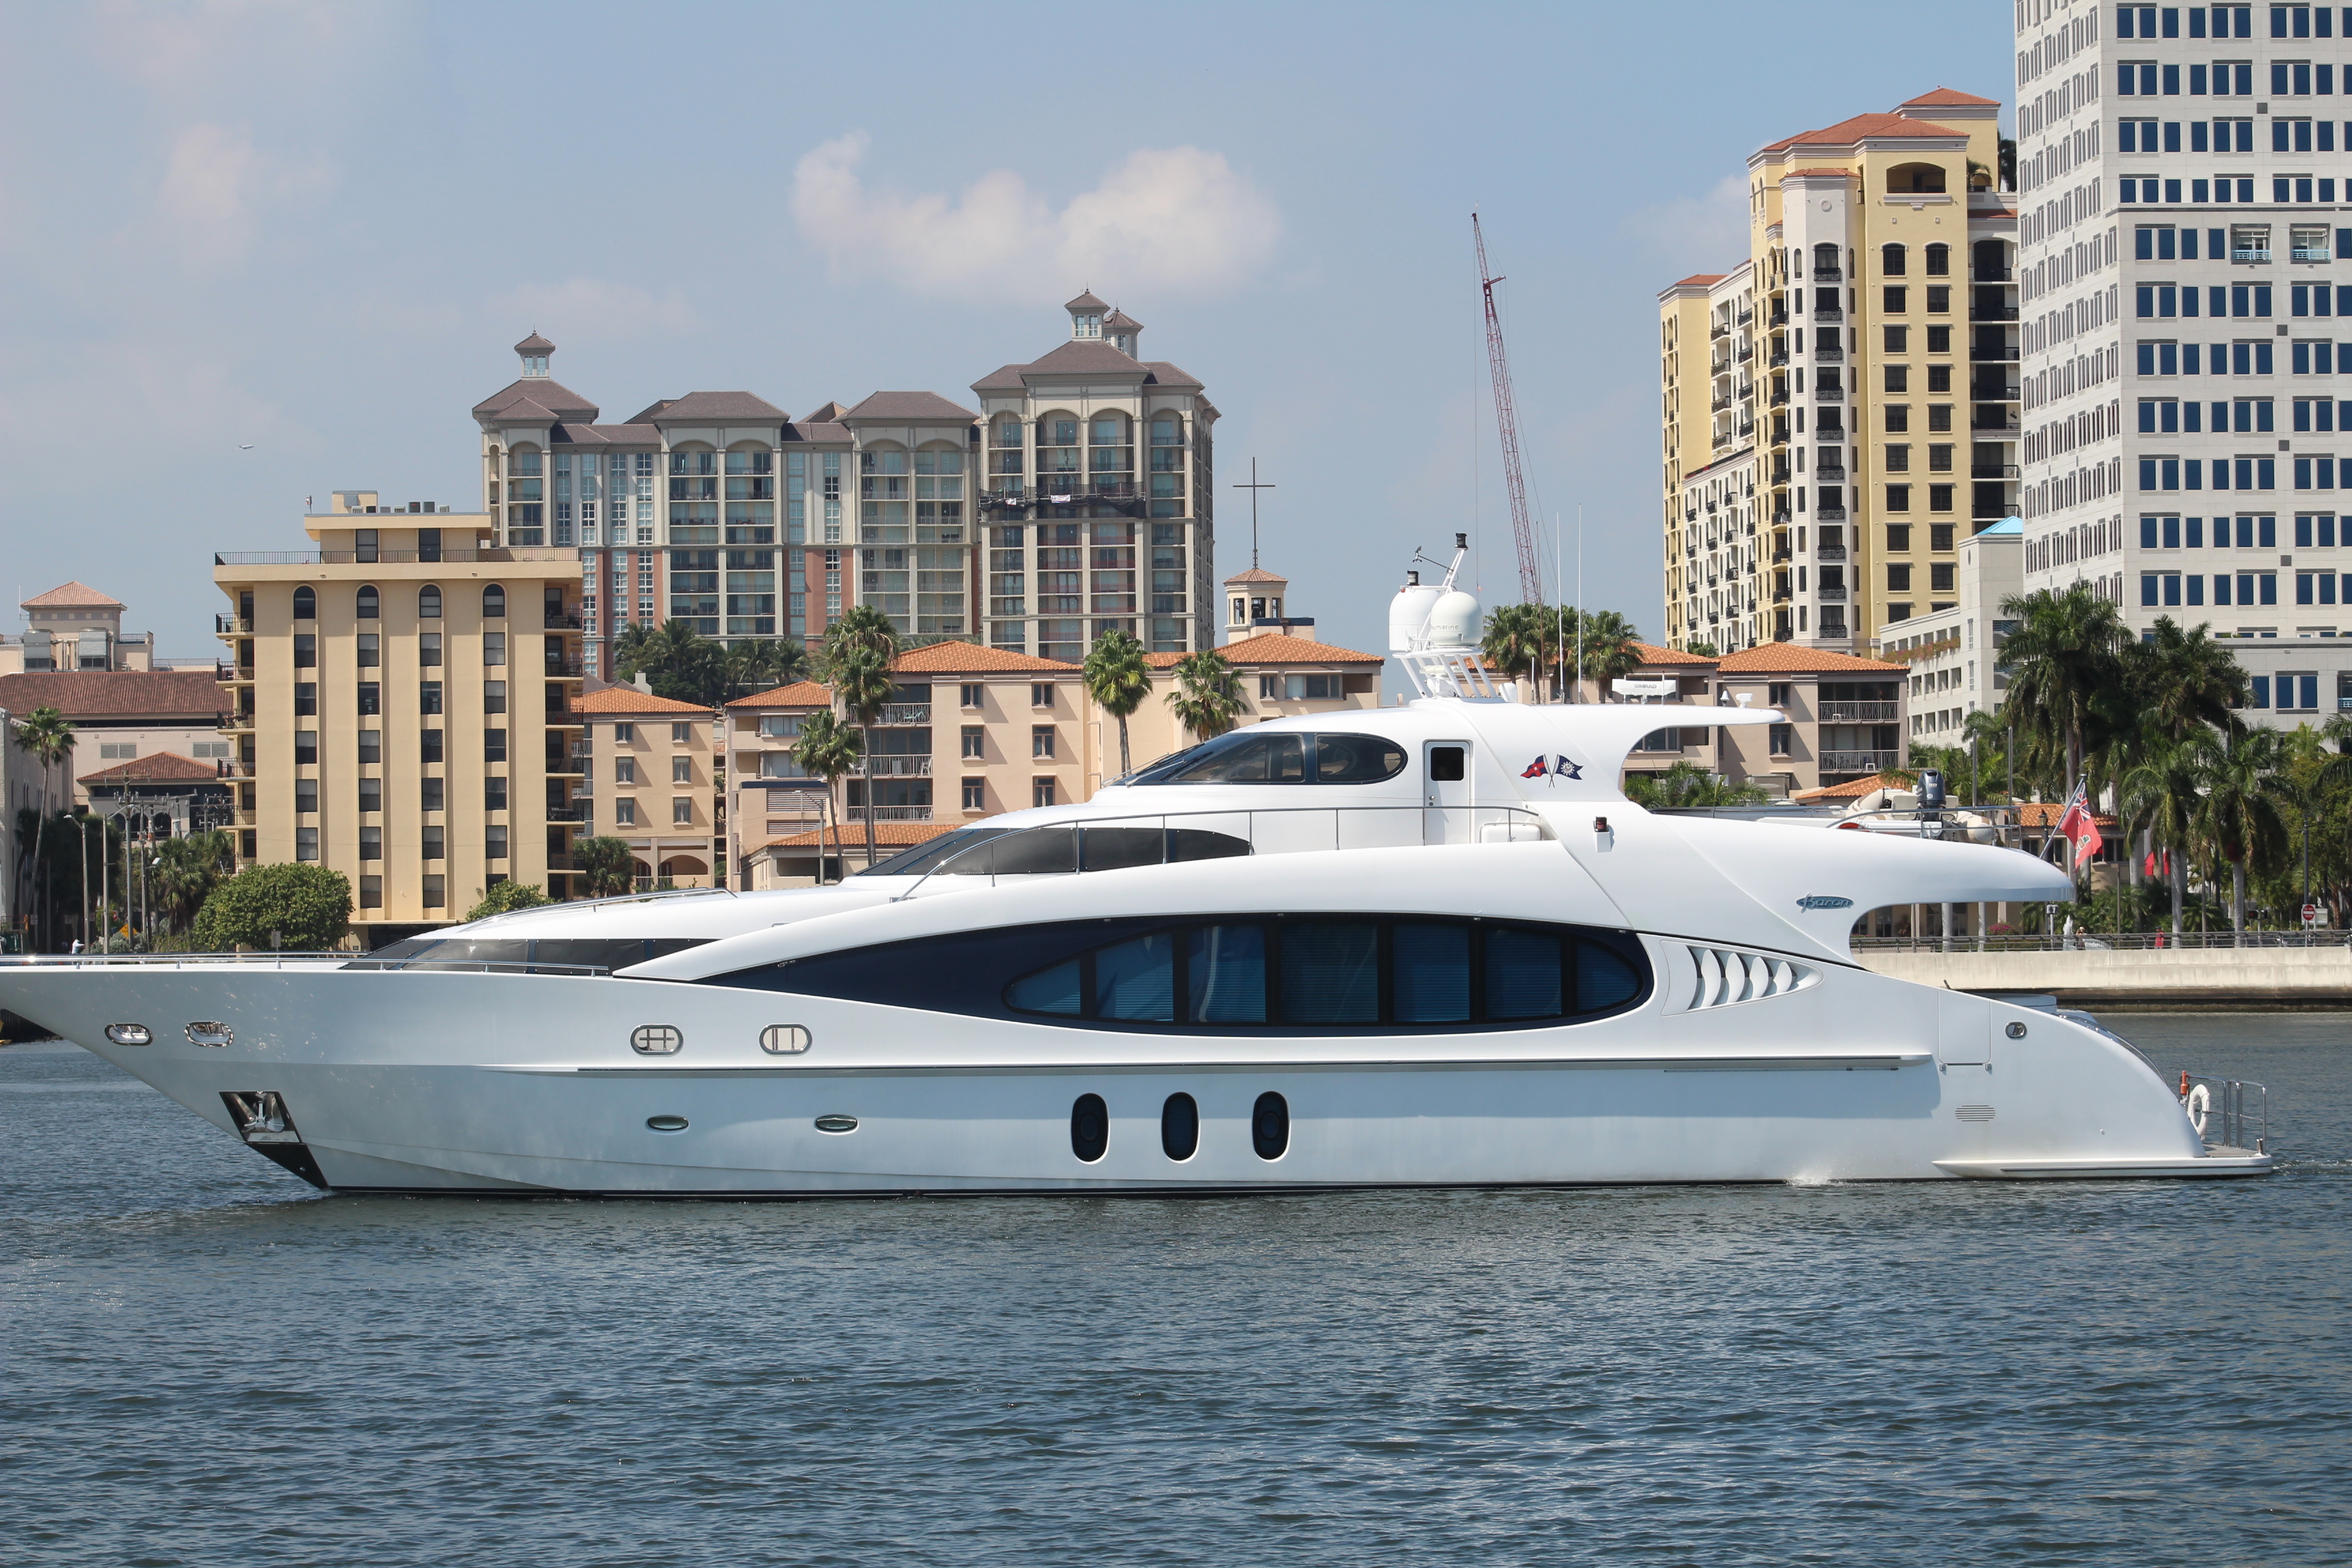 Sea Breeze specs with detailed specification and builder summary